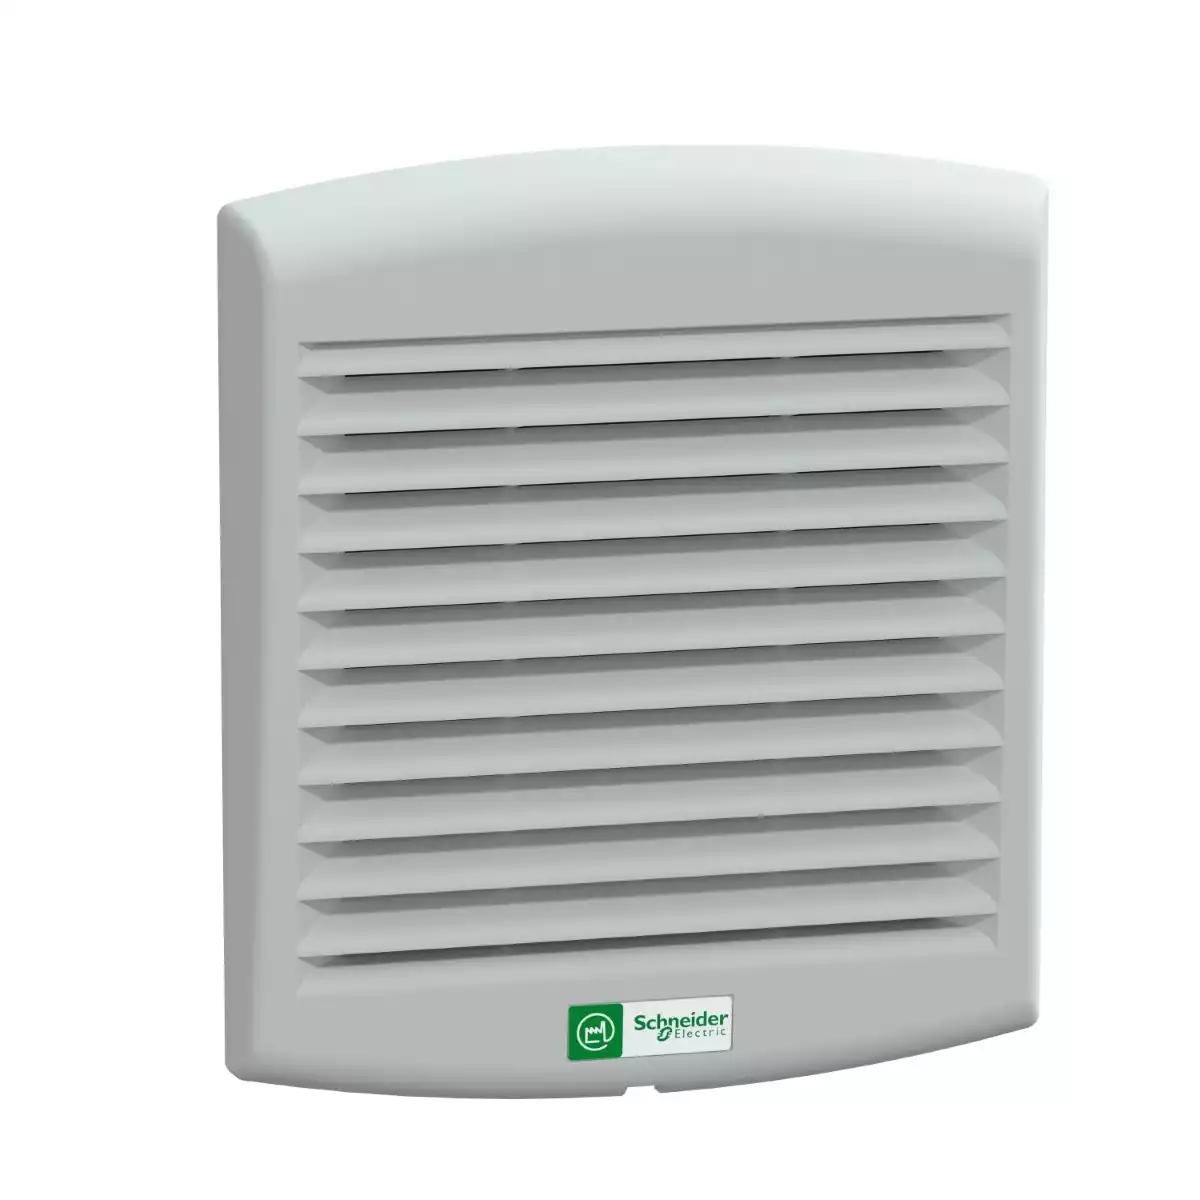 Schneider Electric ClimaSys CV forced vent. IP54, 85m3/h, 230V, with outlet grille and filter G2